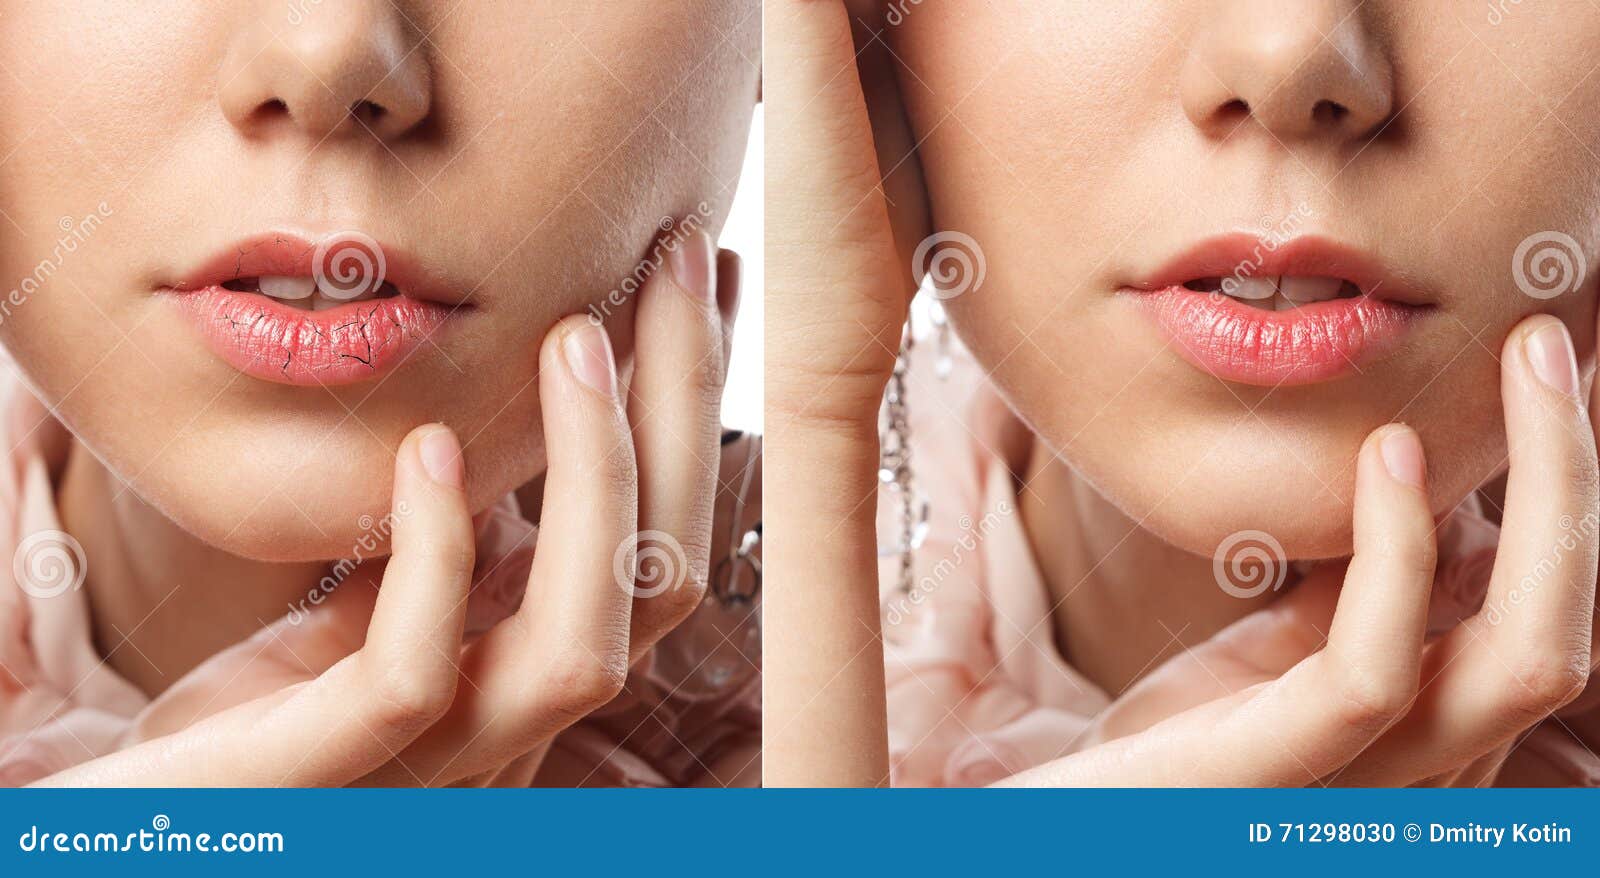 young woman has chapped lips